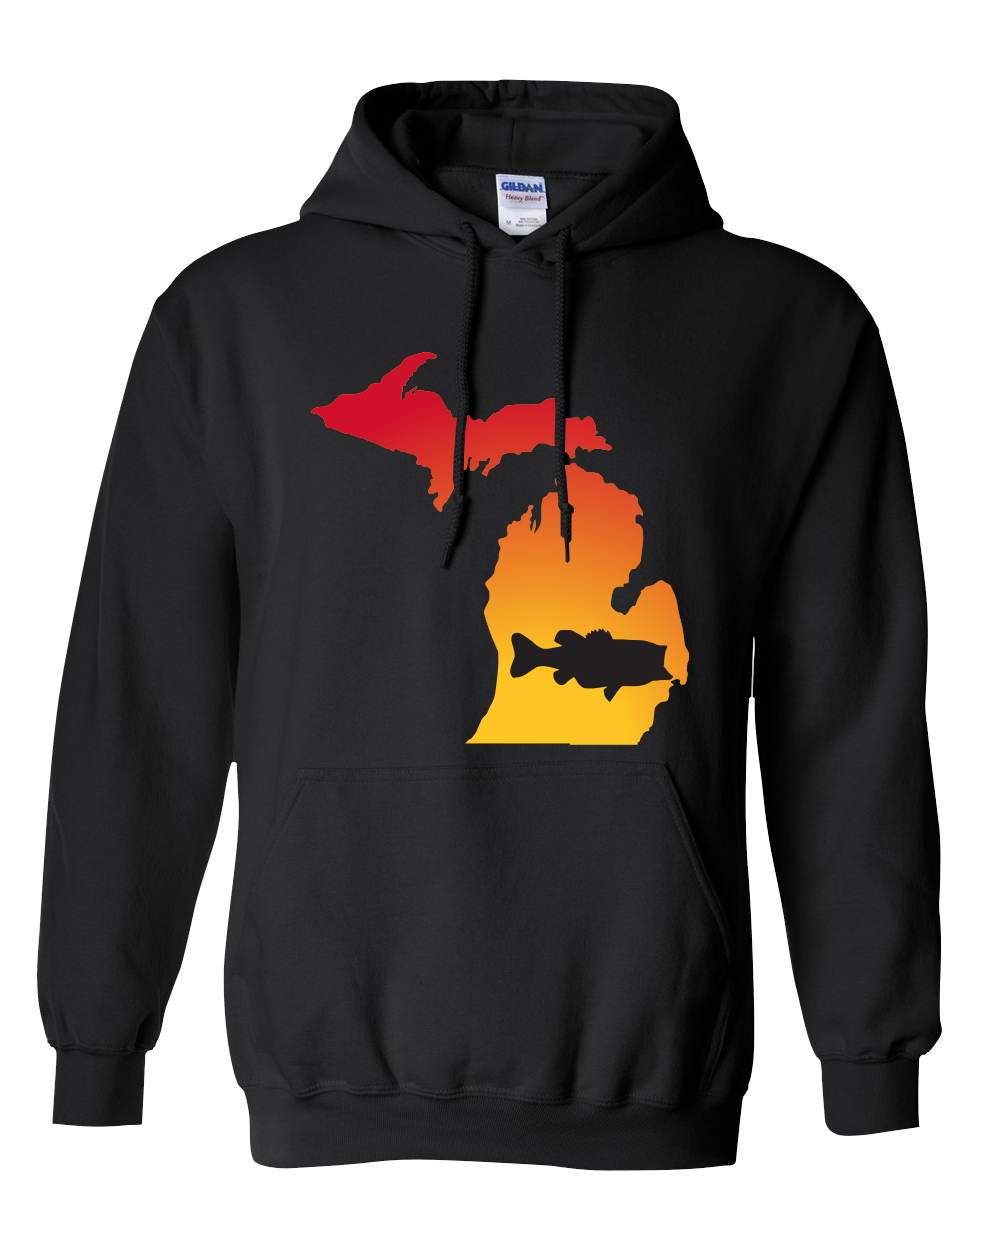 Pullover Hooded Sweatshirt Michigan Black Large Mouth Bass Vibrant Design High Quality Tight Knit Ring Spun Low Maintenance Cotton Printed With The Newest Available Color Transfer Technology